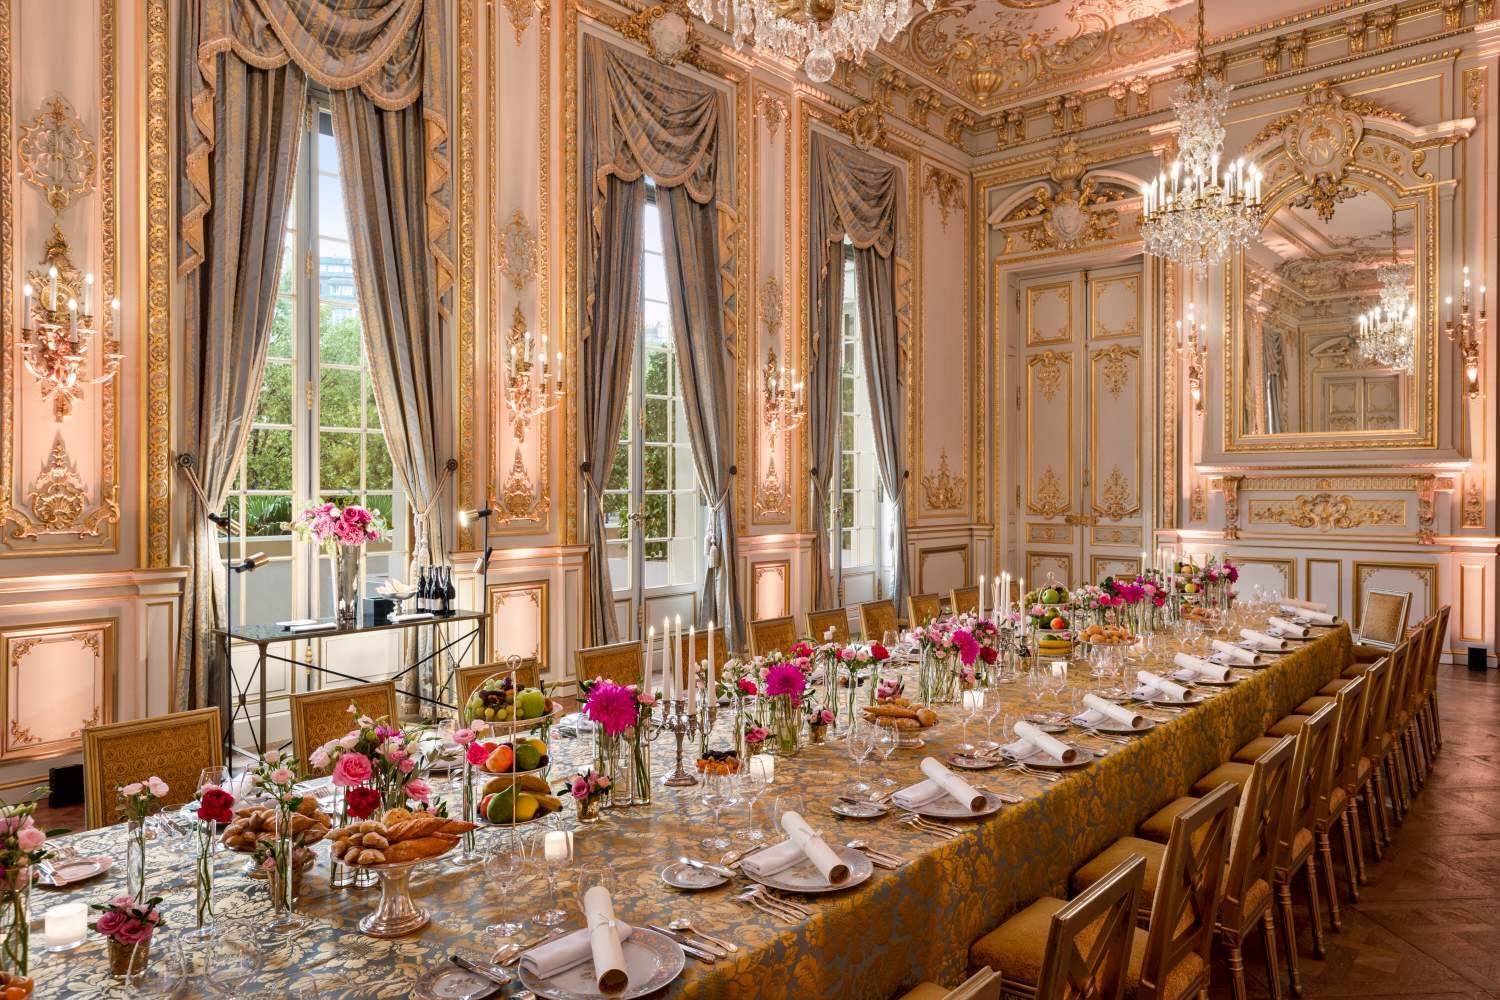 Image showing the dining room of Shangri-La Paris hotel decorated in gold